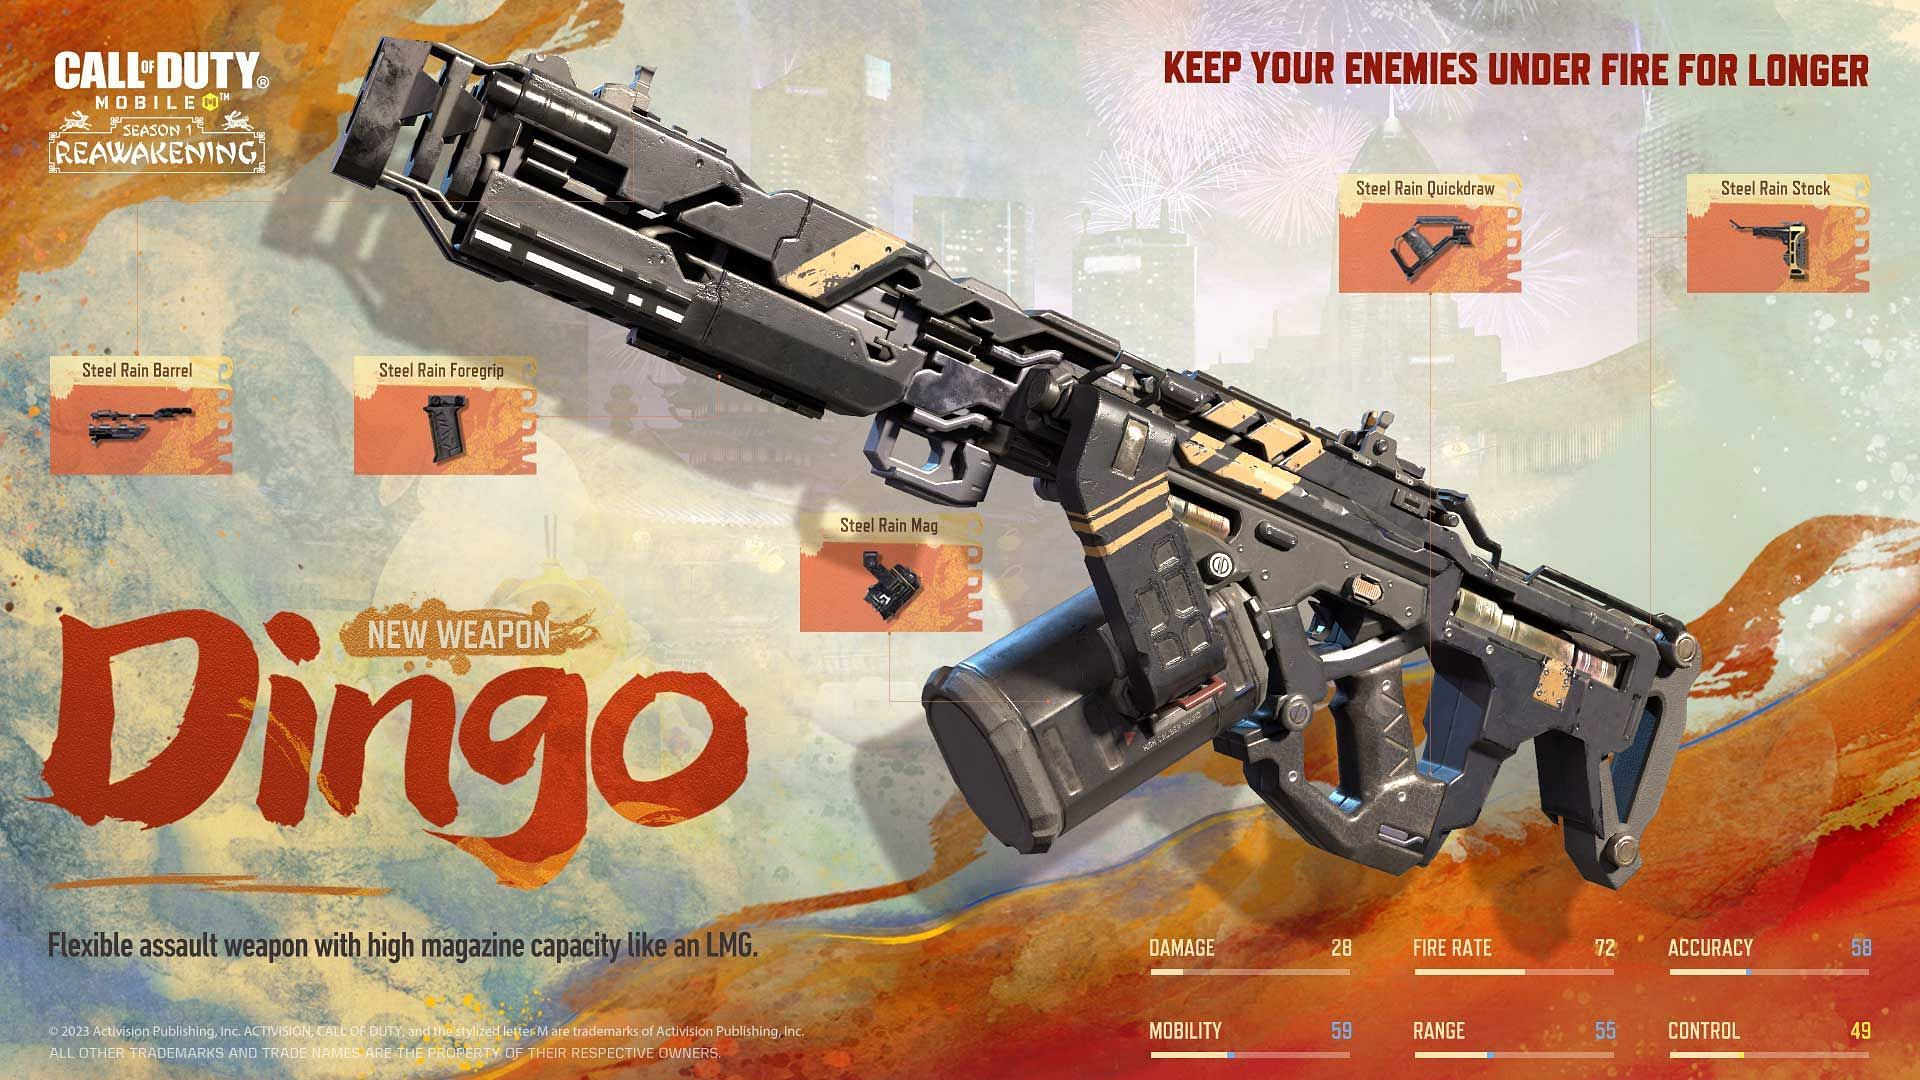 Activision included a new weapon Dingo in COD Mobile season 1 (image via Activision)